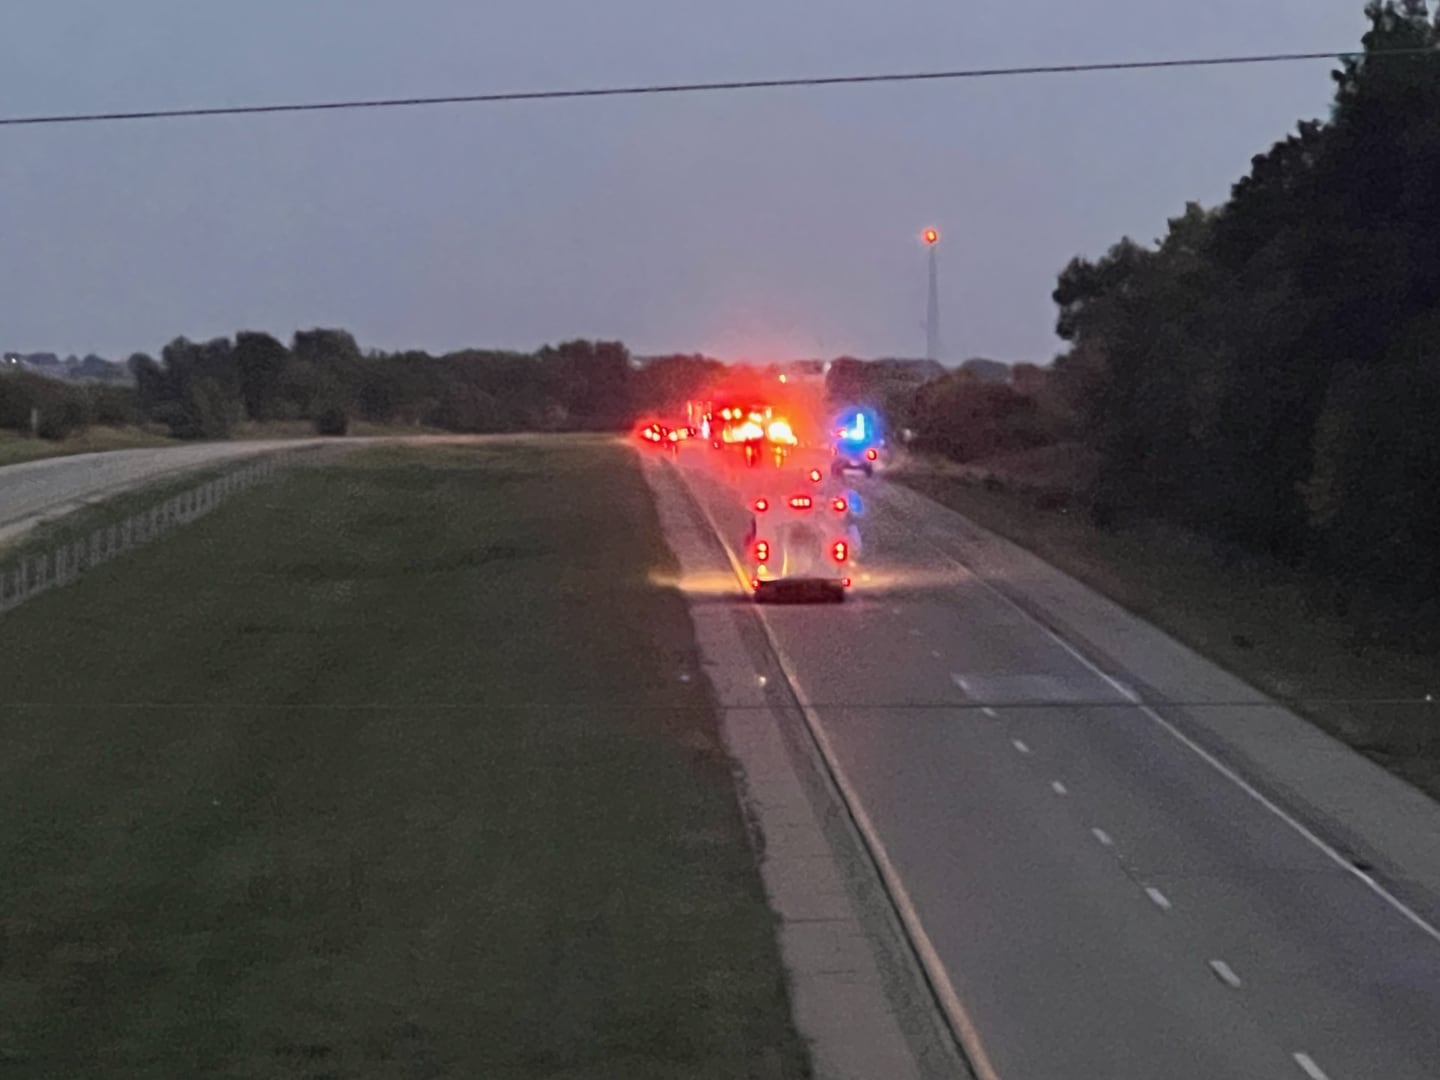 A van carrying four adults and 10 juveniles rolled over on Interstate 39 near Troy Grove on Saturday night, sending all occupants to local hospitals.